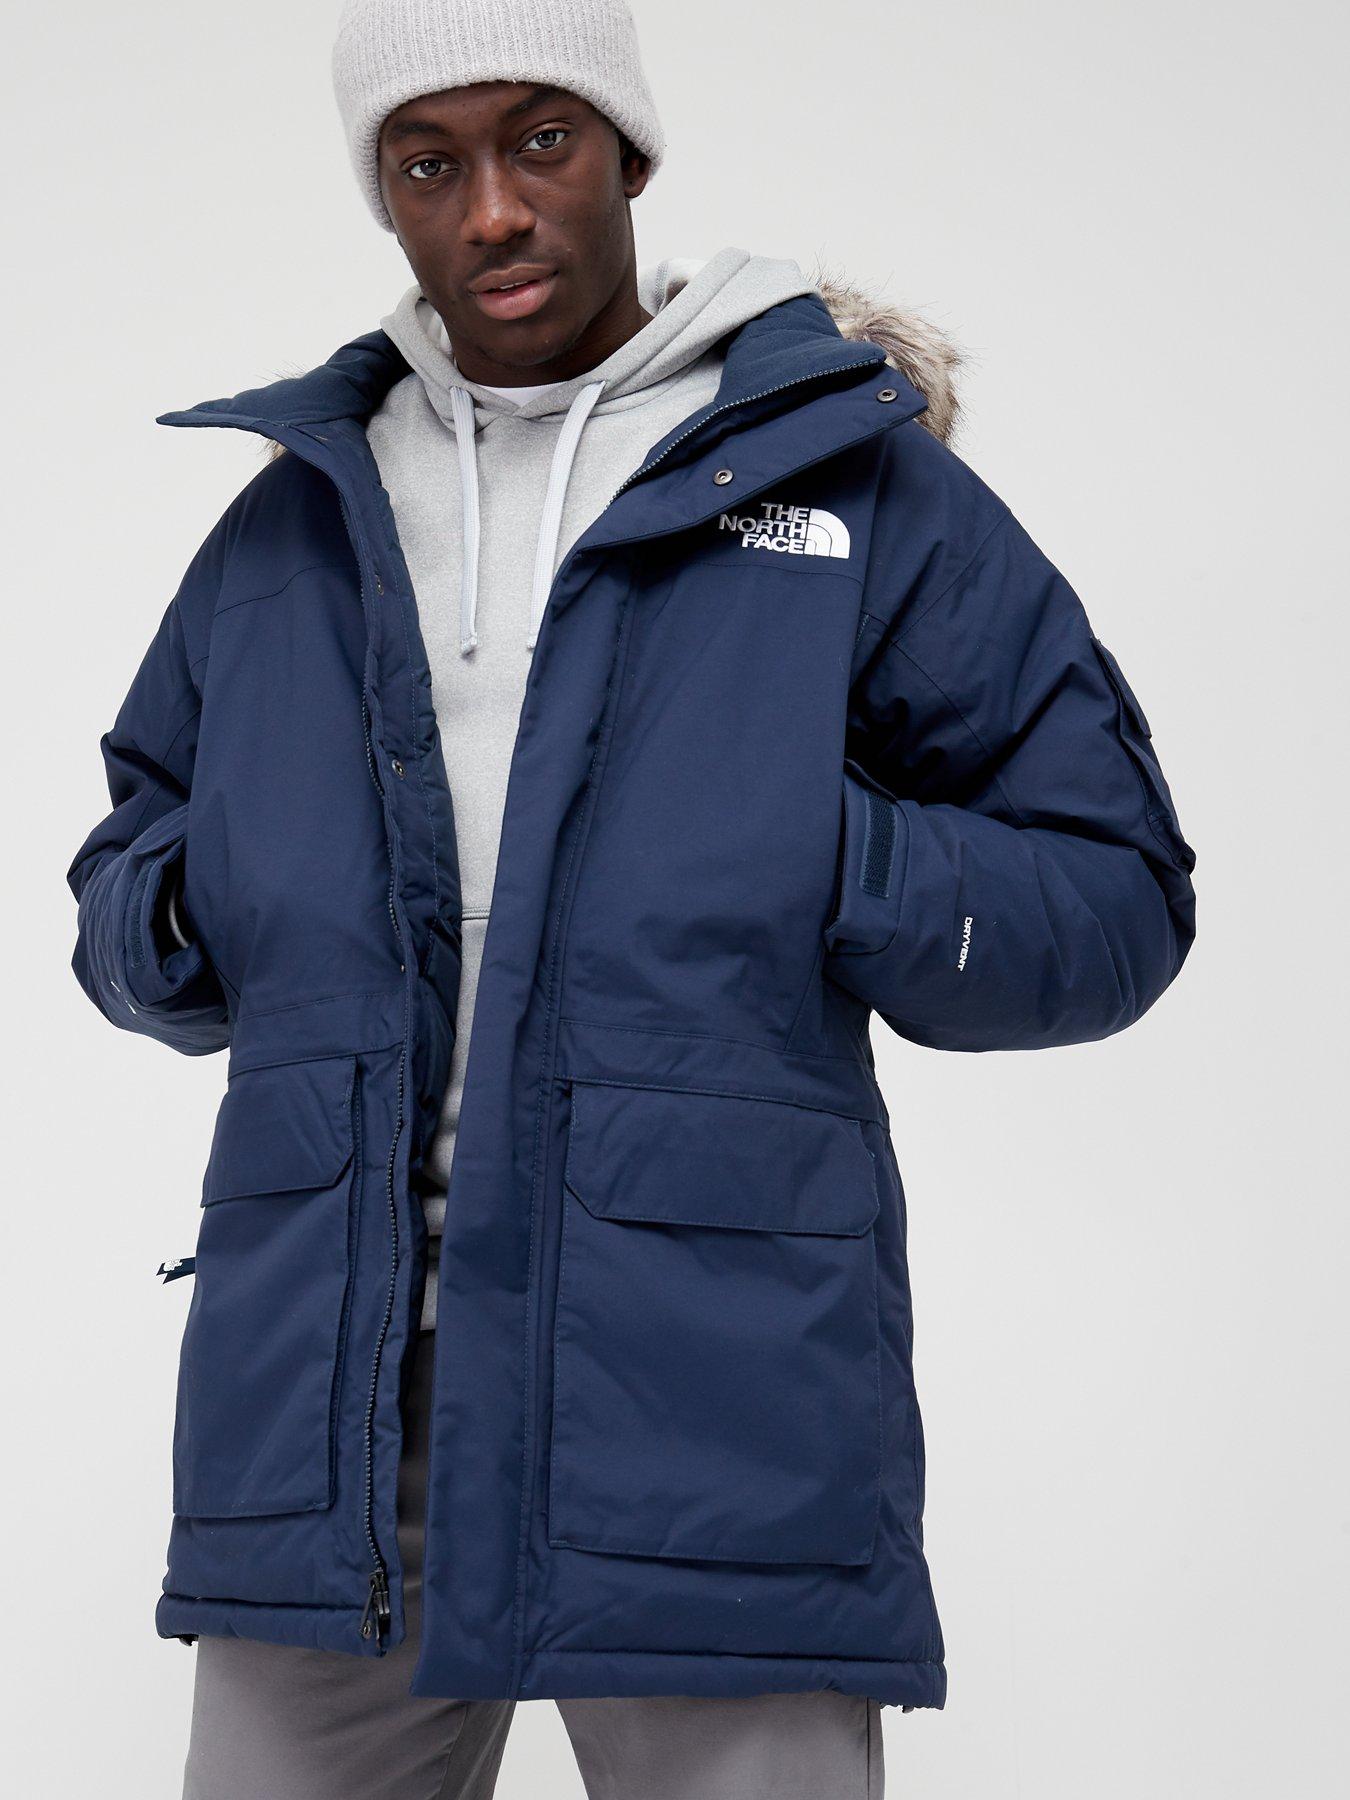 XXL | The north face | Coats & jackets | Men | www.very.co.uk